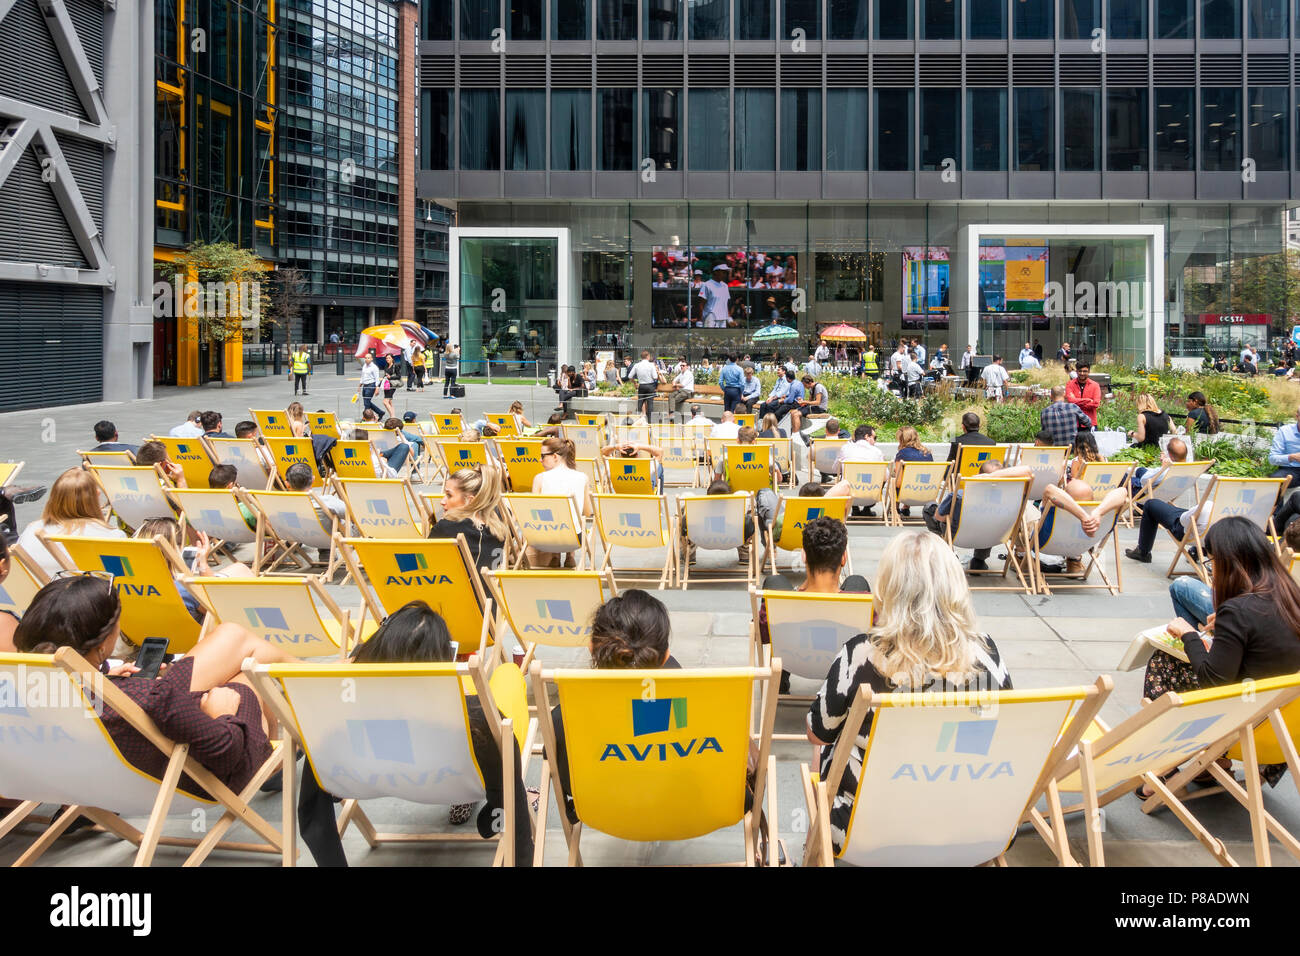 People, mainly local workers, enjoying a relaxing summer lunchtime in St Helen's Piazza, Leadenhall Street, City of London, England, UK Stock Photo